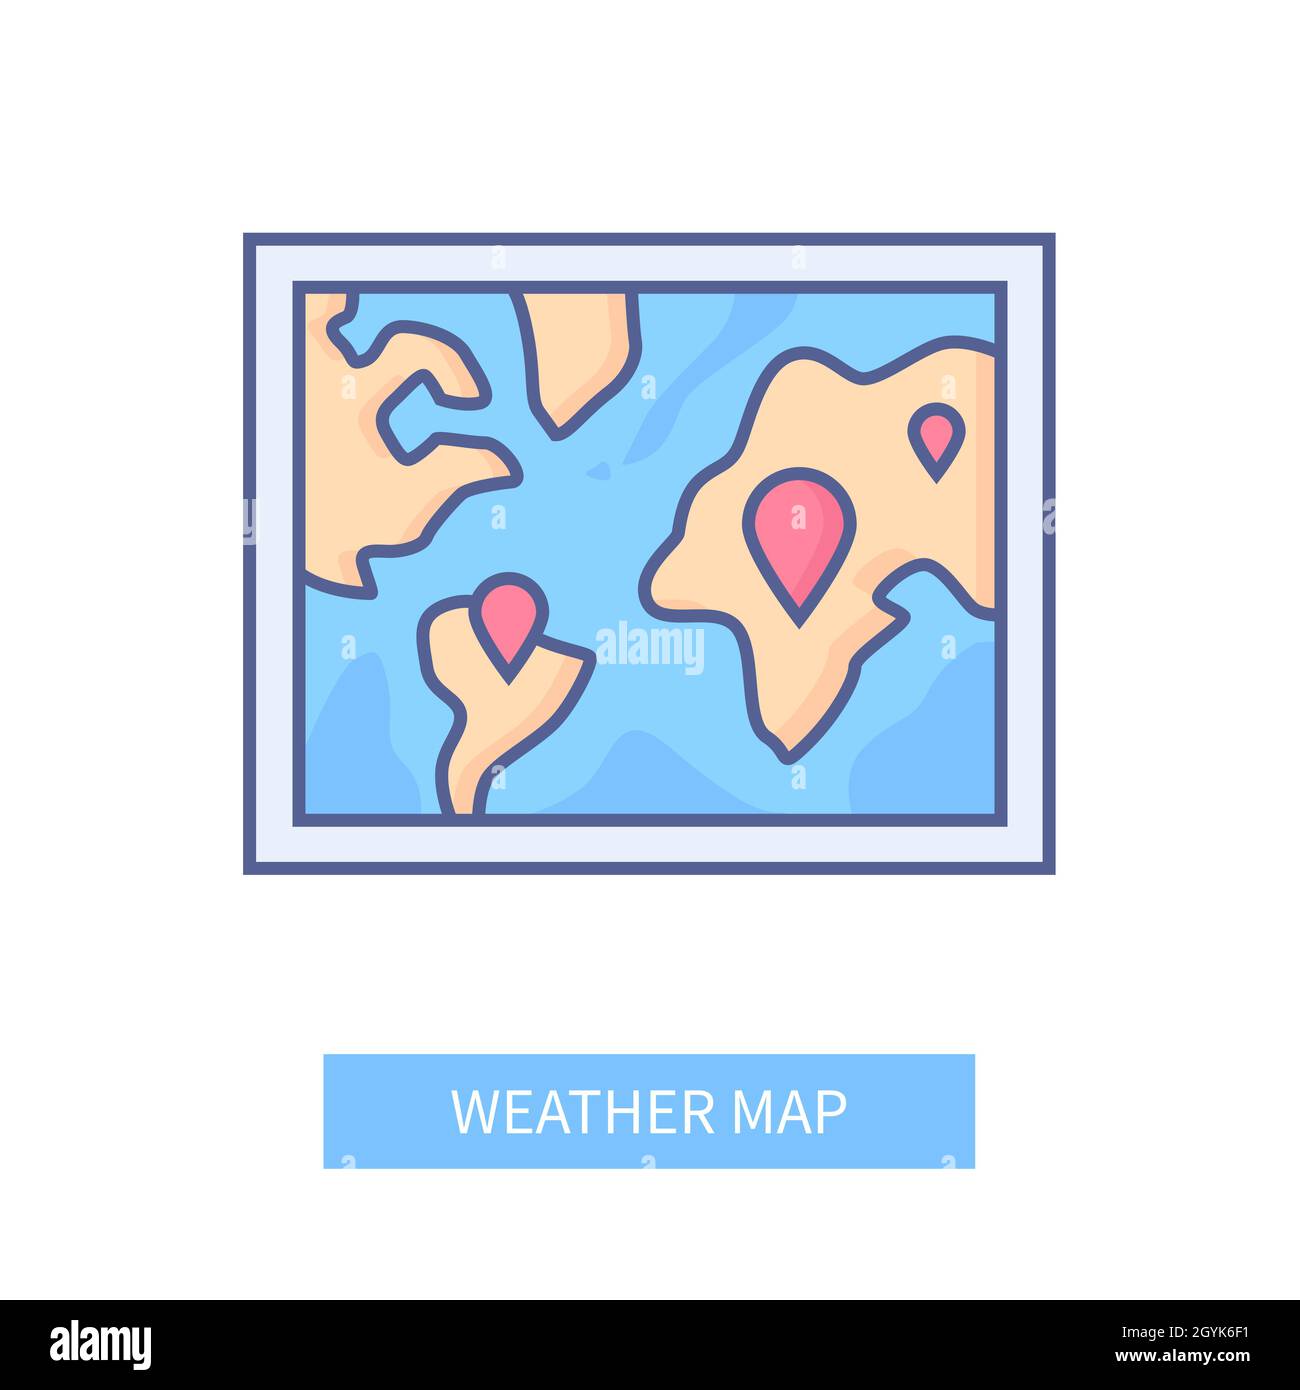 Weather map - modern line design style icon on white background. Neat detailed image of wall picture or TV screen with continents, ocean and marked lo Stock Vector